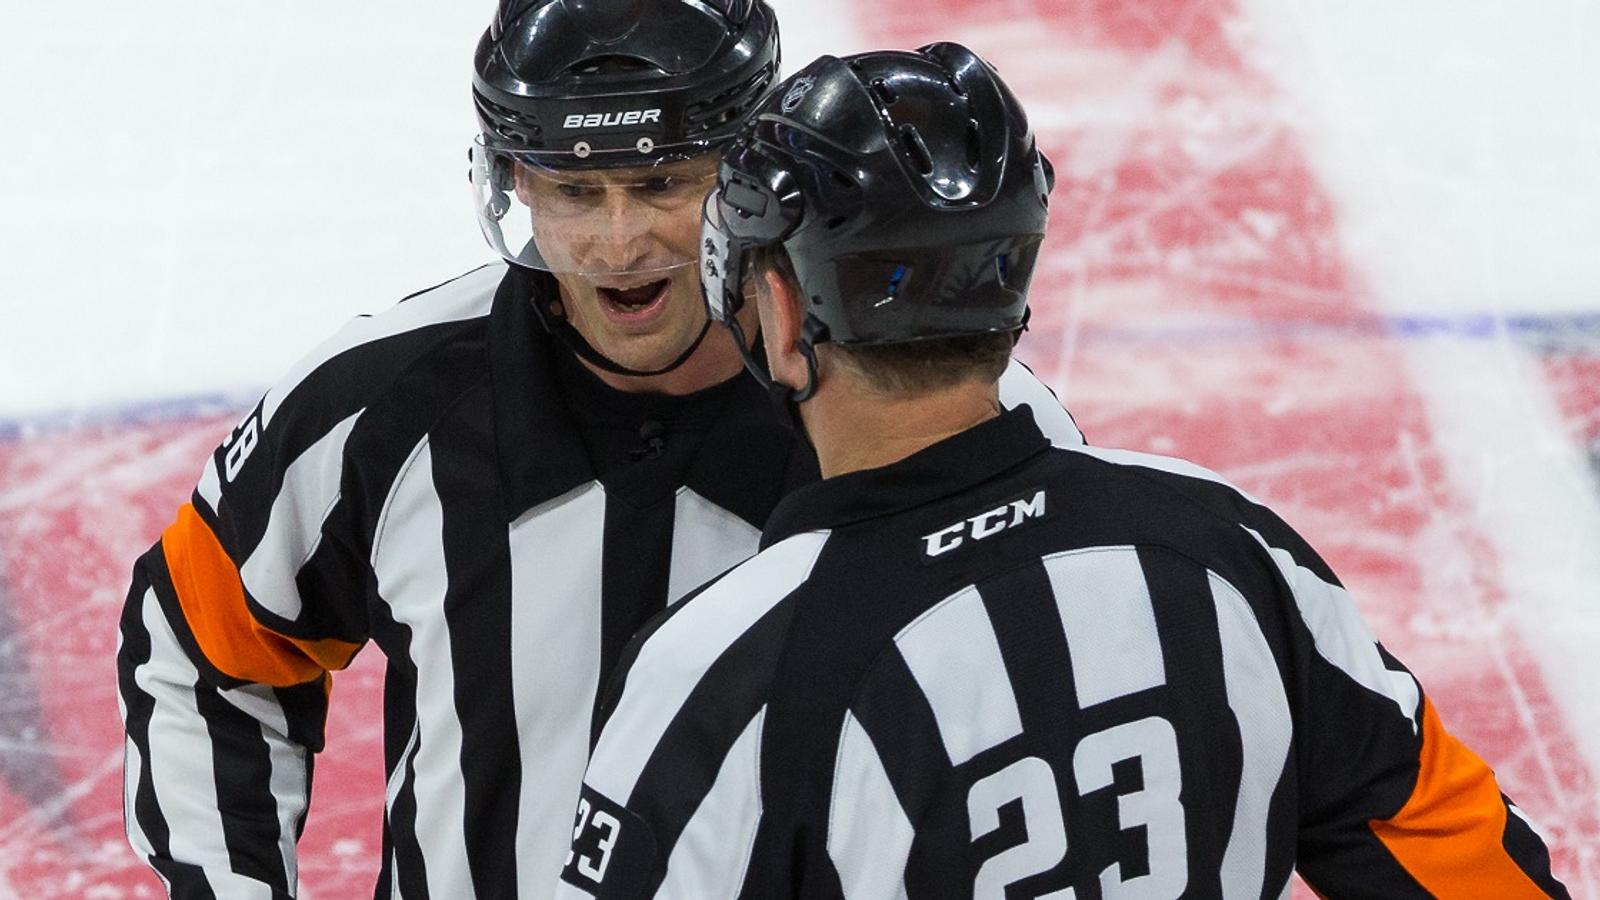 NHL makes a controversial choice of officials for Game 1 of the Stanley Cup Final.